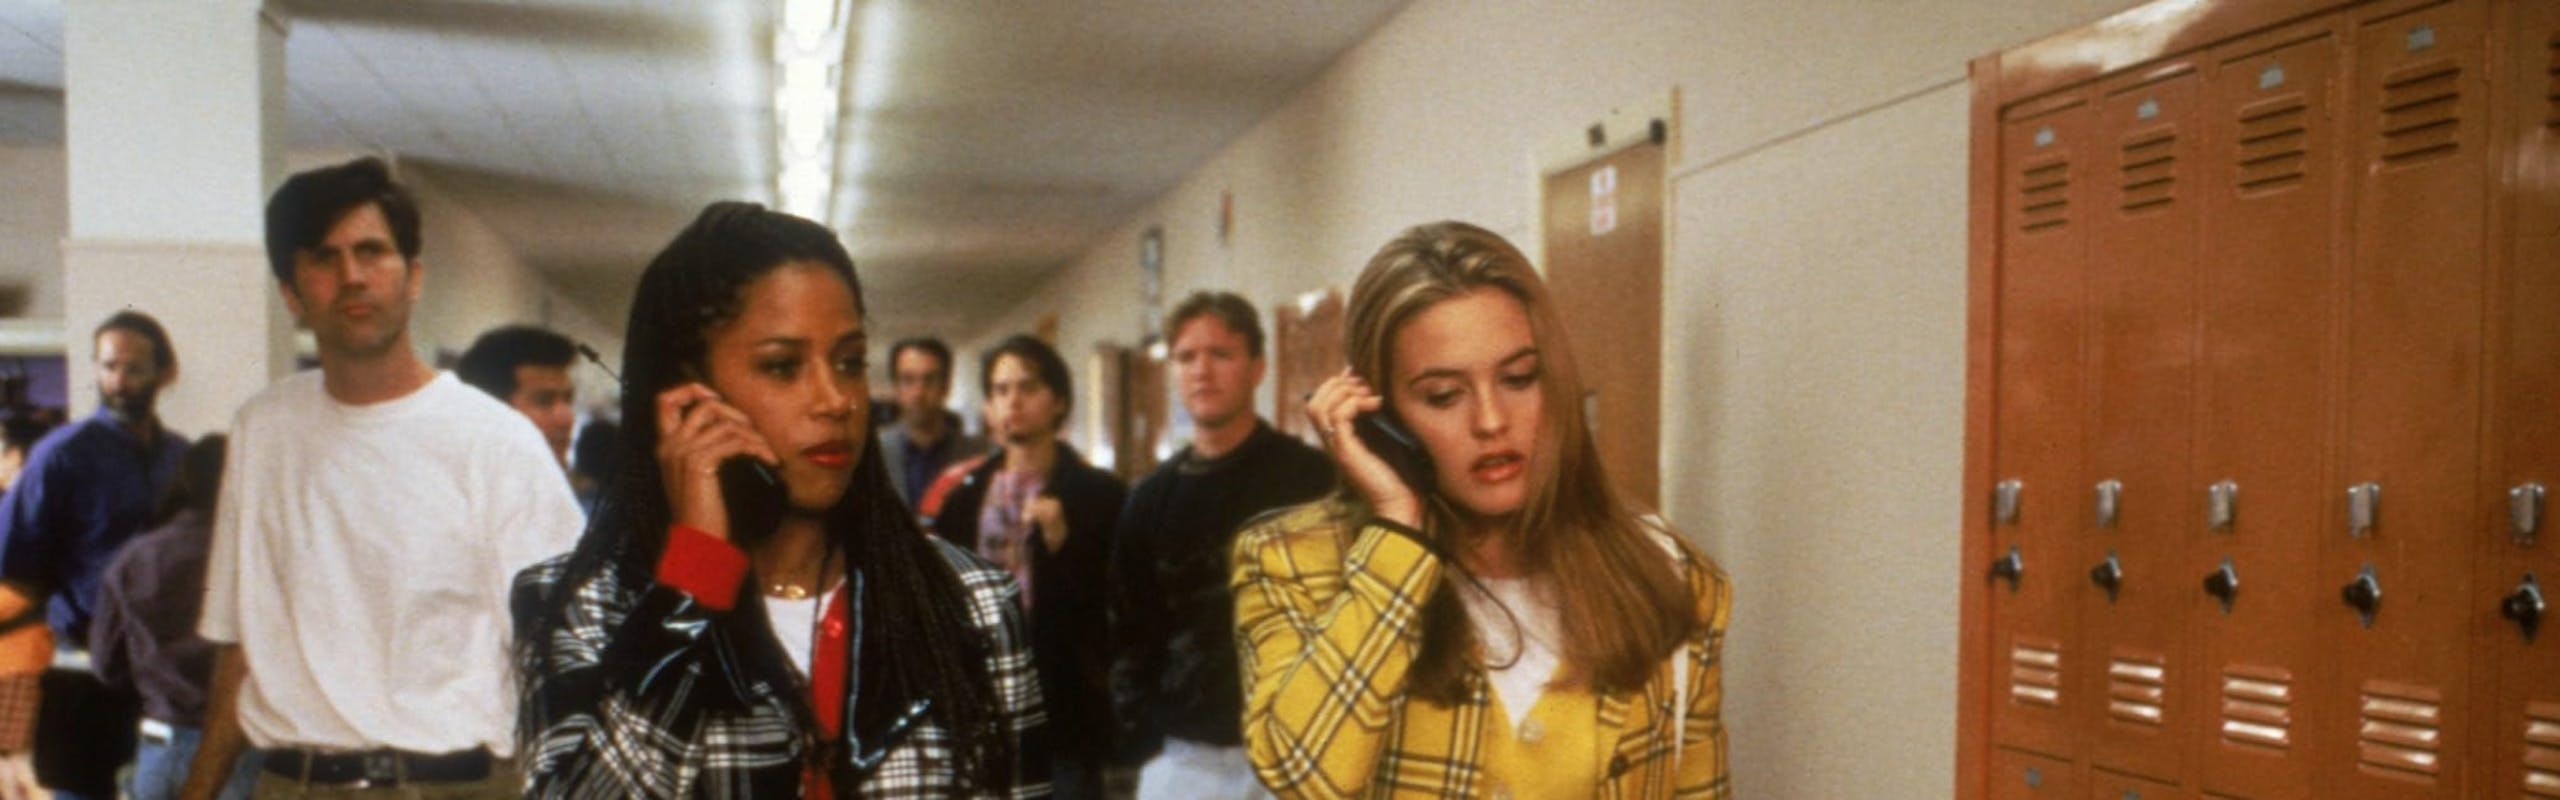 cher and dionne in plaid outfits in a still from clueless